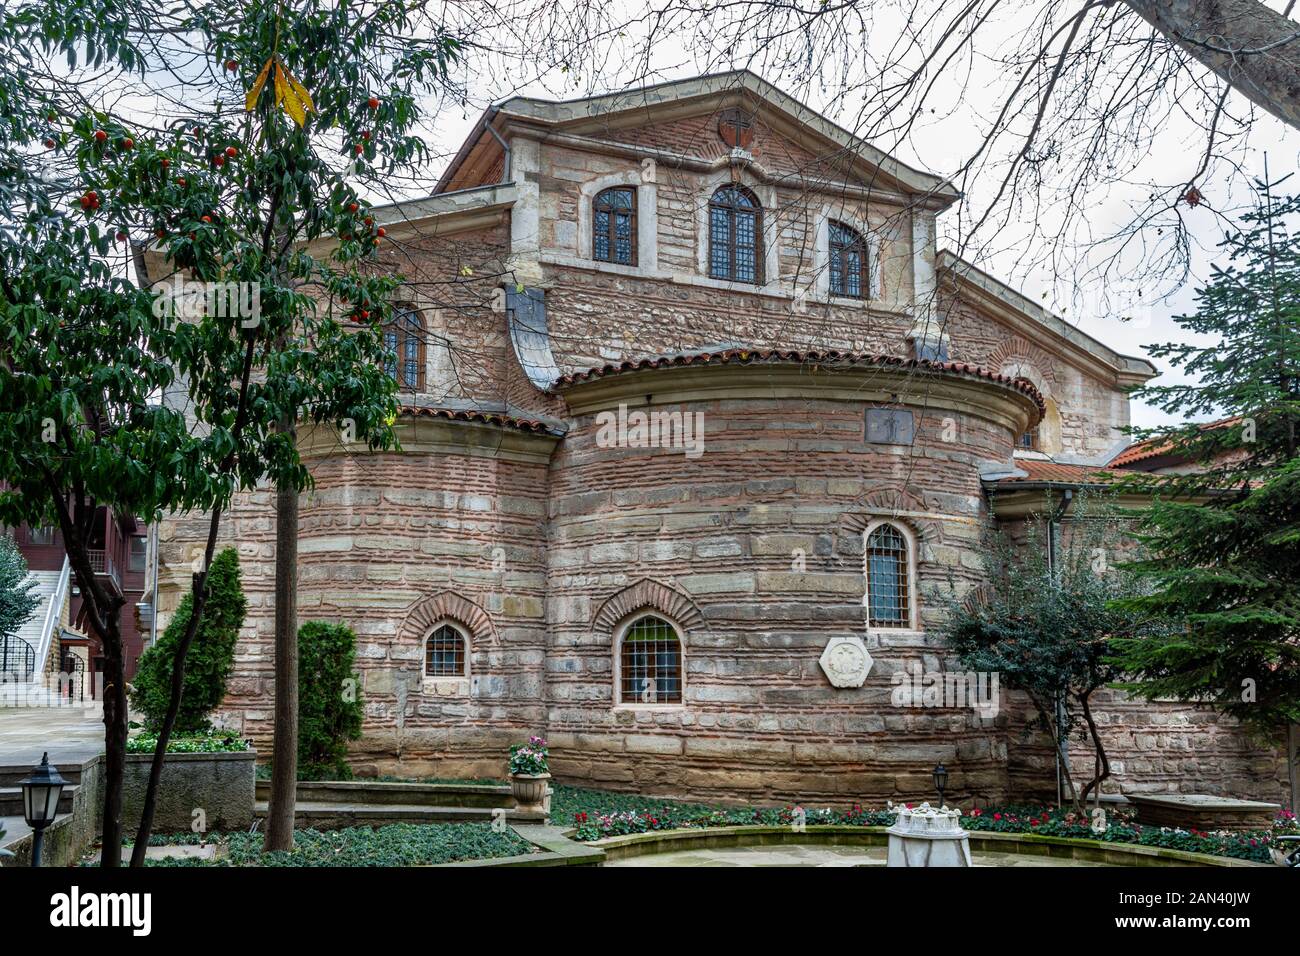 Balat, Fatih, Istanbul / Turkey - January 13 2020: The Patriarchal Church of St. George, Constantinople Ecumenical Orthodox Patriarchate exterior view Stock Photo